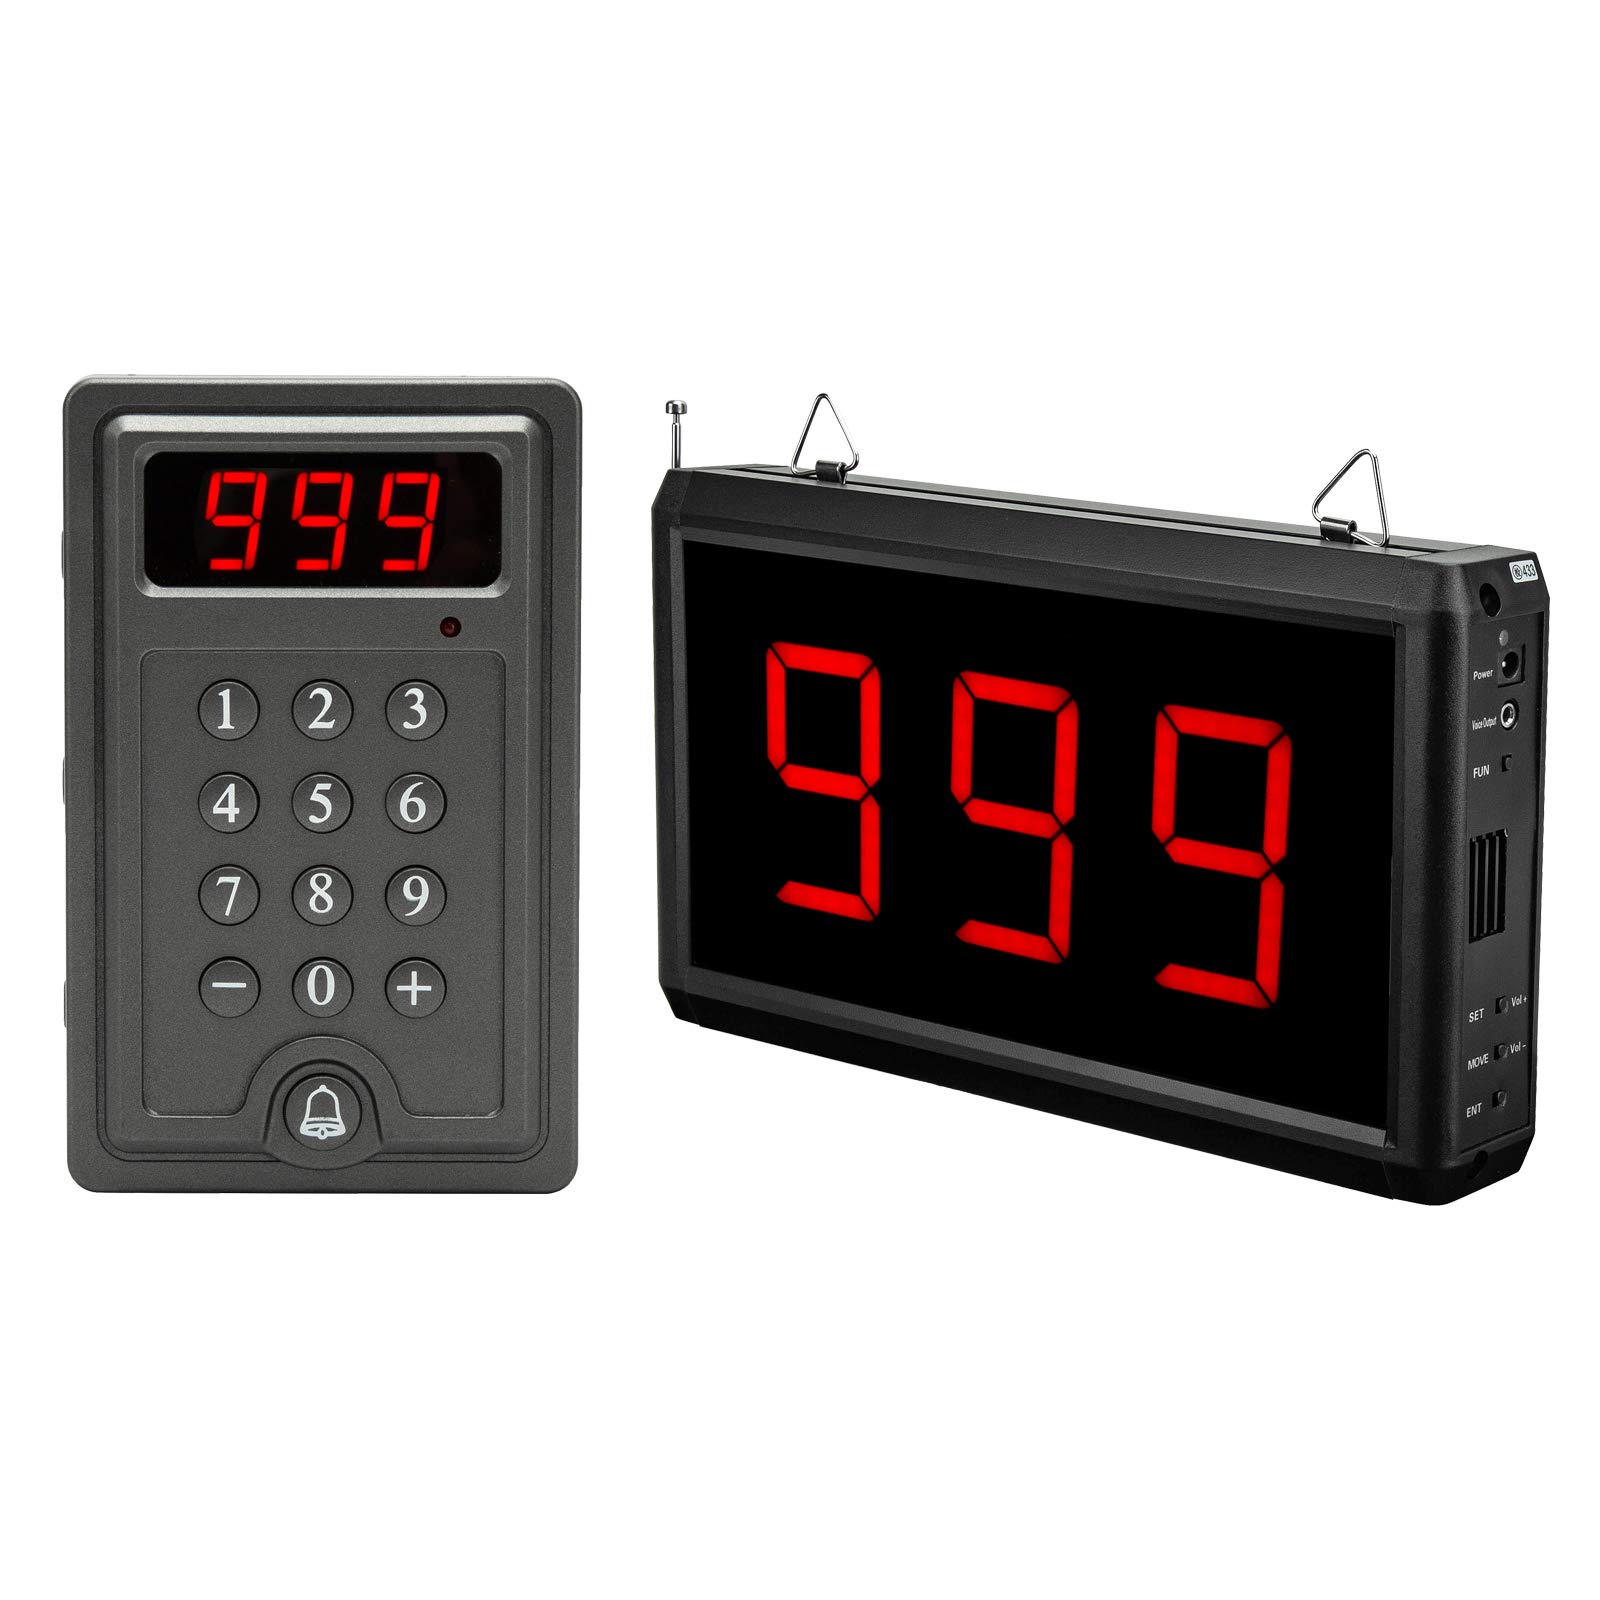 ChunHee Wireless Queue Calling System-Restaurant Speaker System-Take a Number Display Server Paging System-Number Broadcast Management System with ...